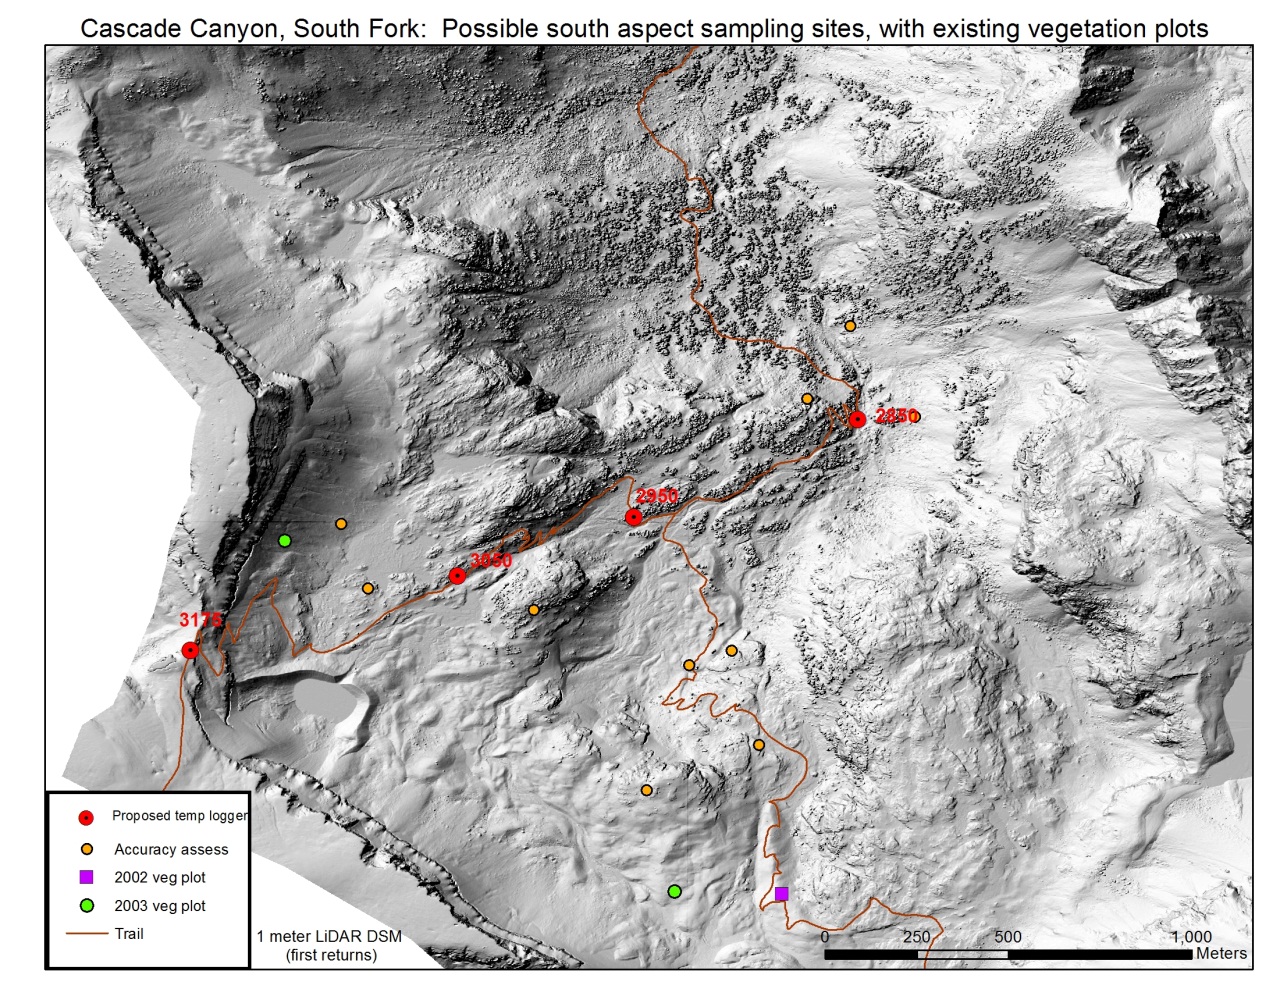 Alpine monitoring site locations. North is oriented toward the top of the image.